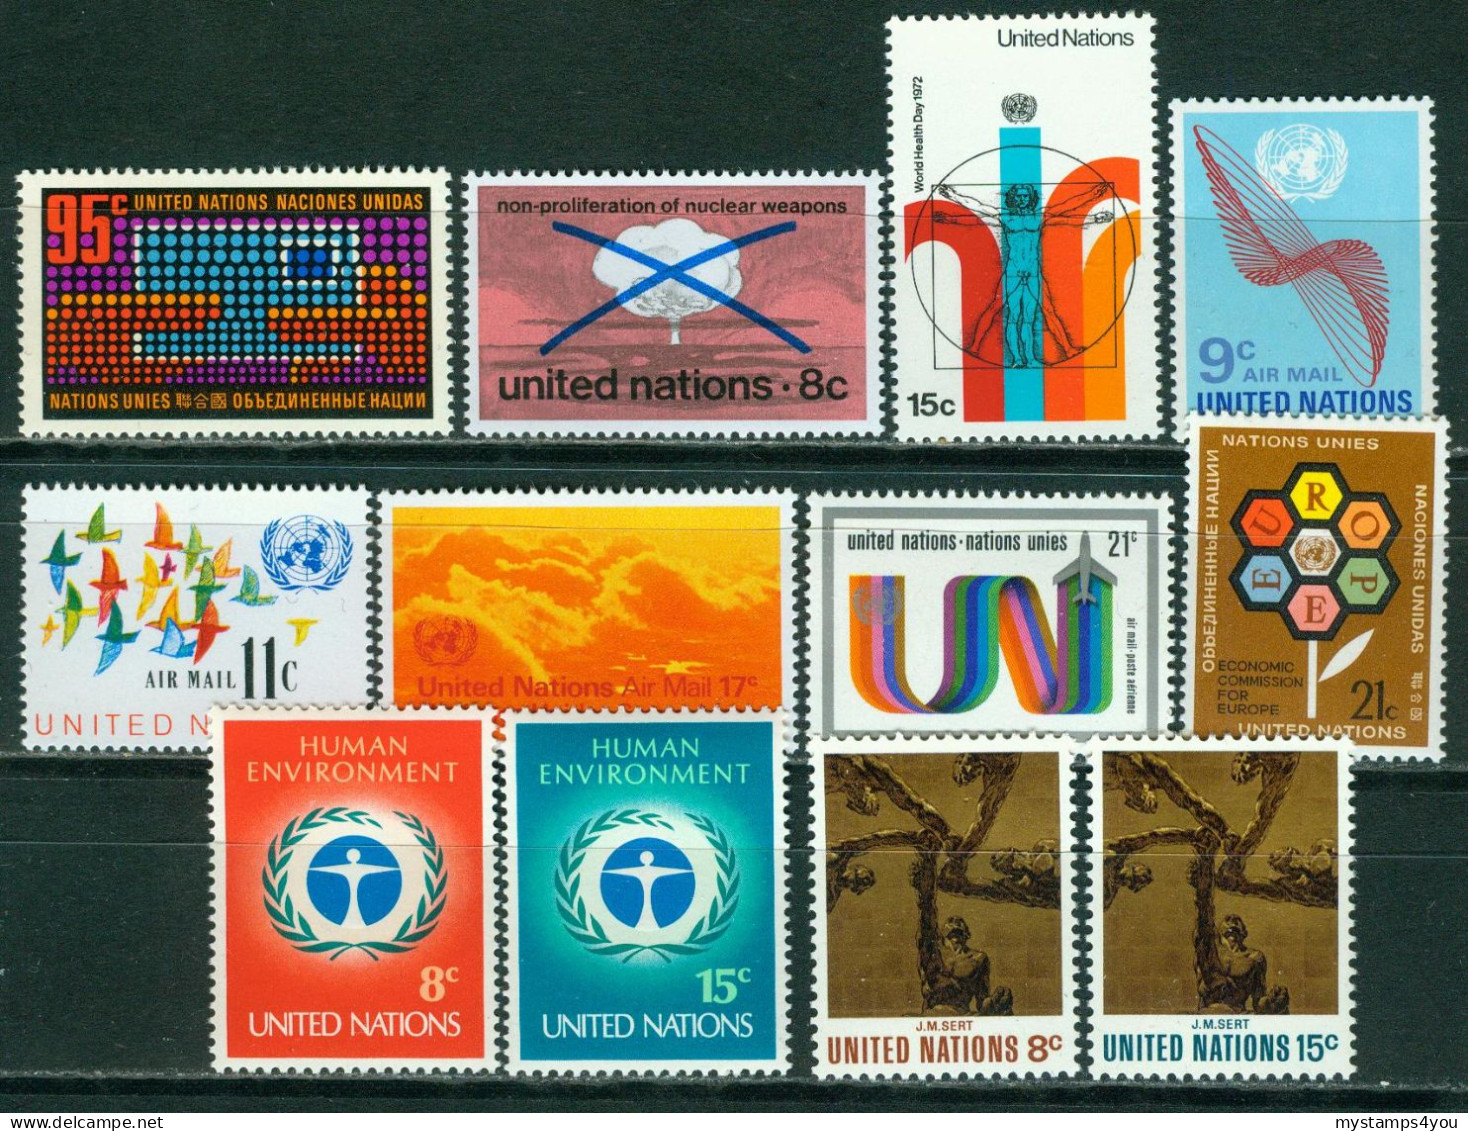 Bm UN New York (UNO) 1972 MiNr 242-253 MNH | Complete Year 1972 #kar-1502a - Unused Stamps